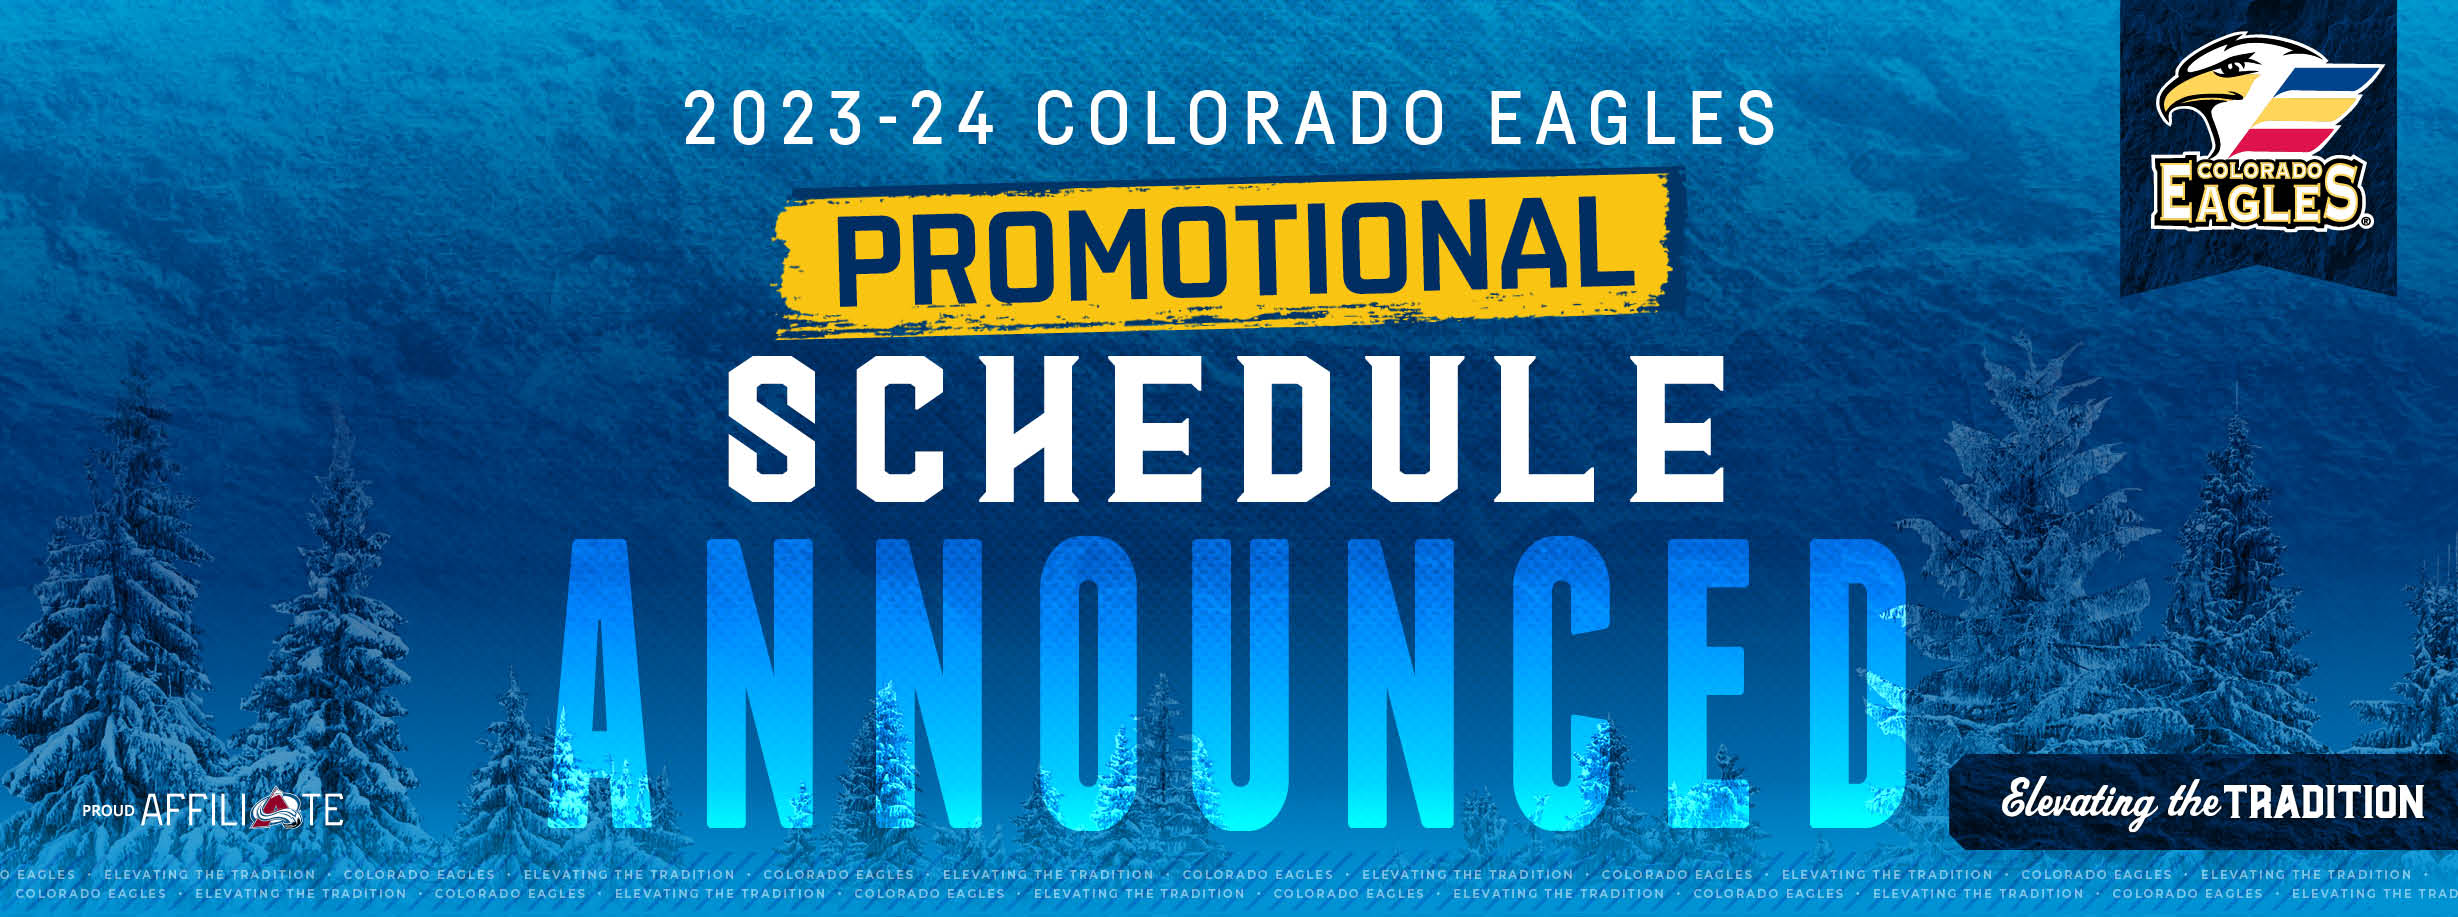 Eagles Announce 2023-24 Promotional Schedule